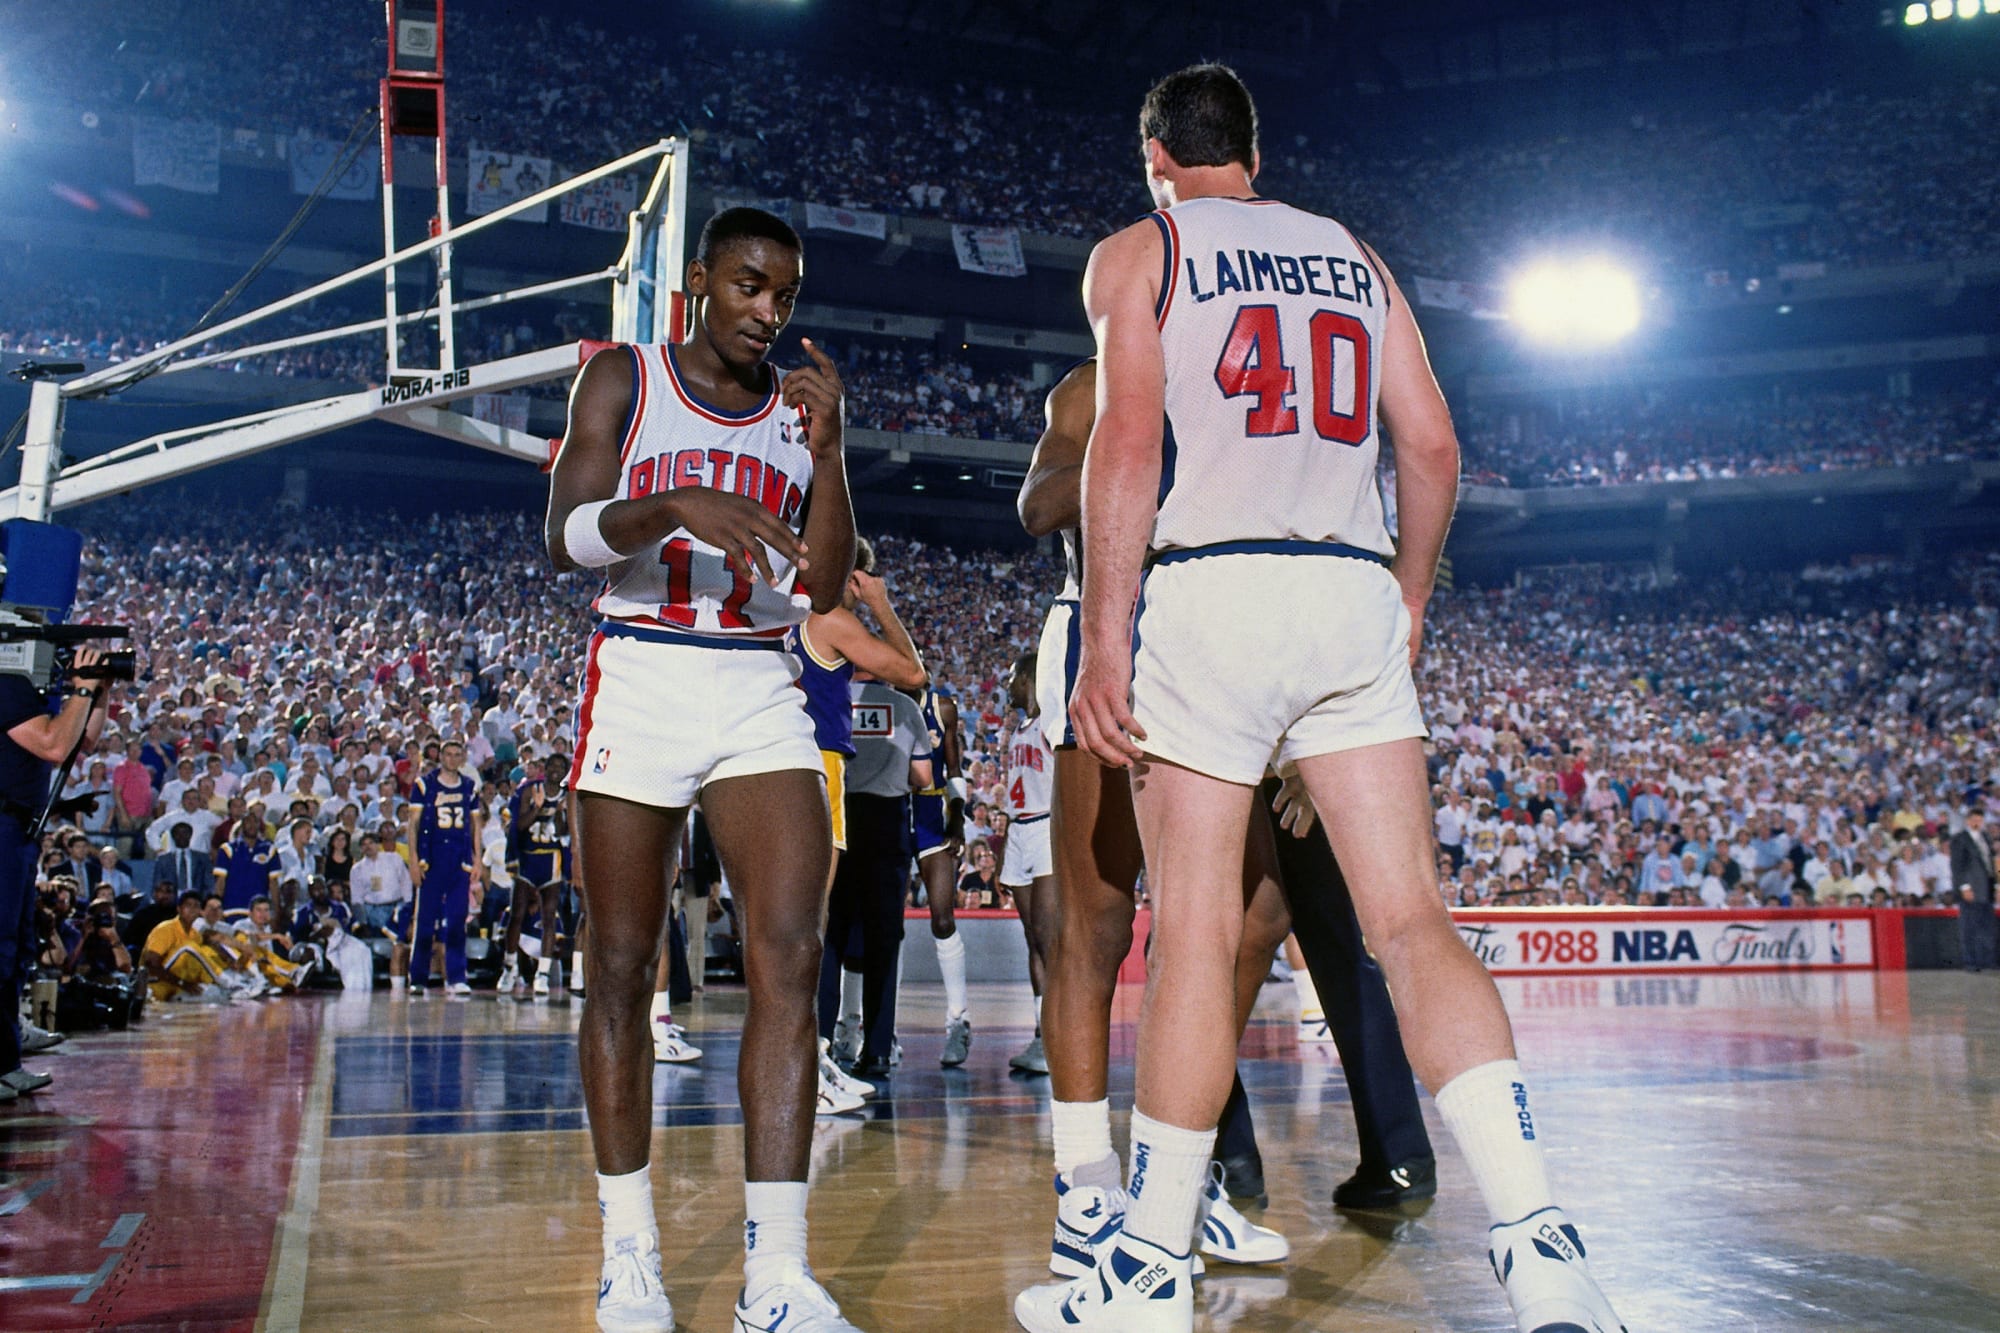 Laimbeer's leadership and tough guy tactics made him a leader of the Bad  Boys - Vintage Detroit Collection